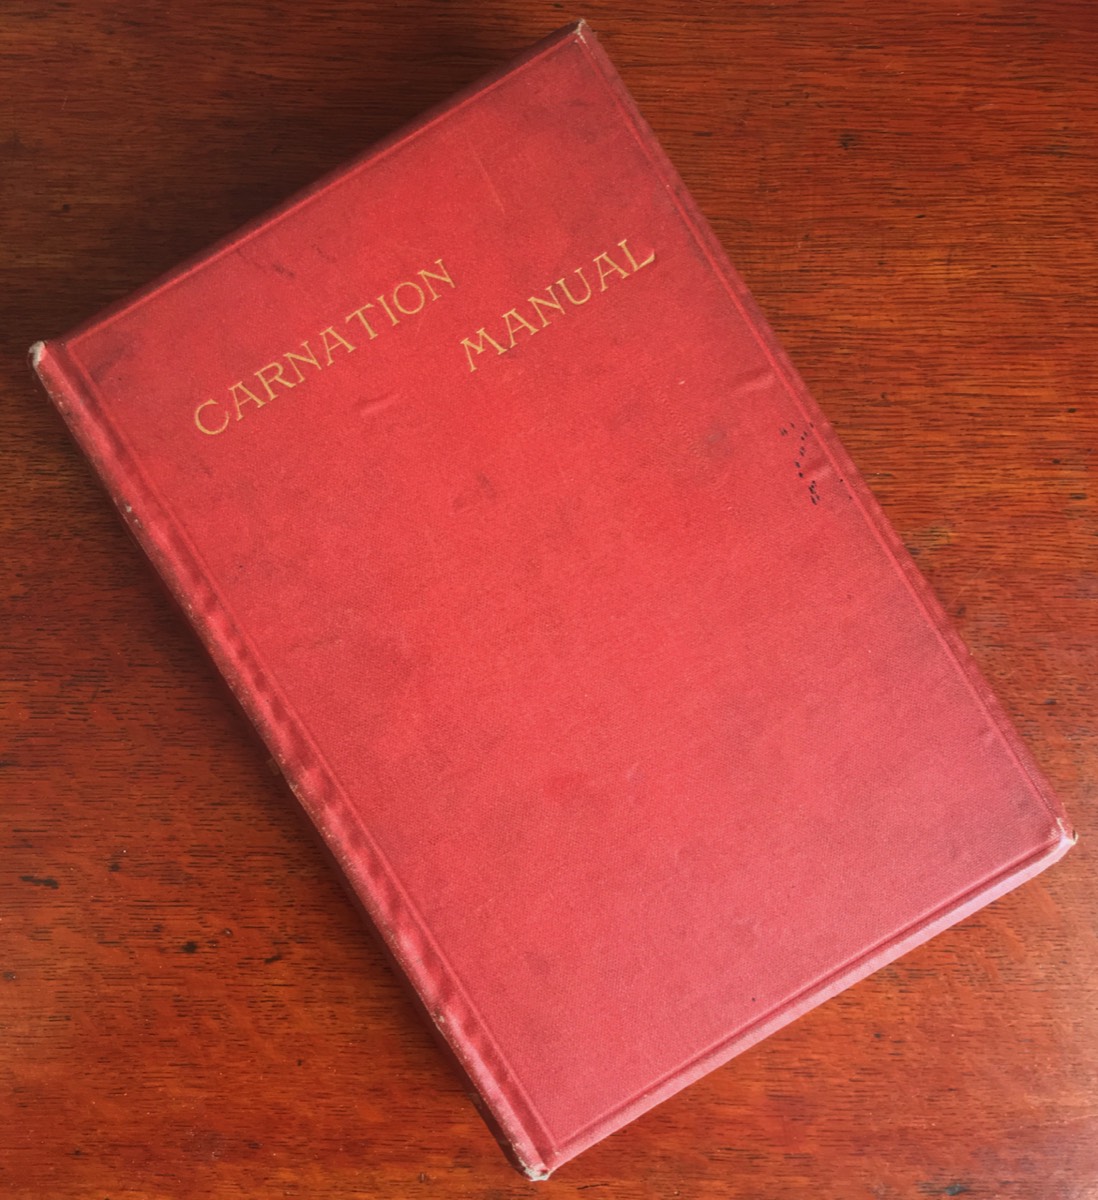 Carnation-Manual - Cover